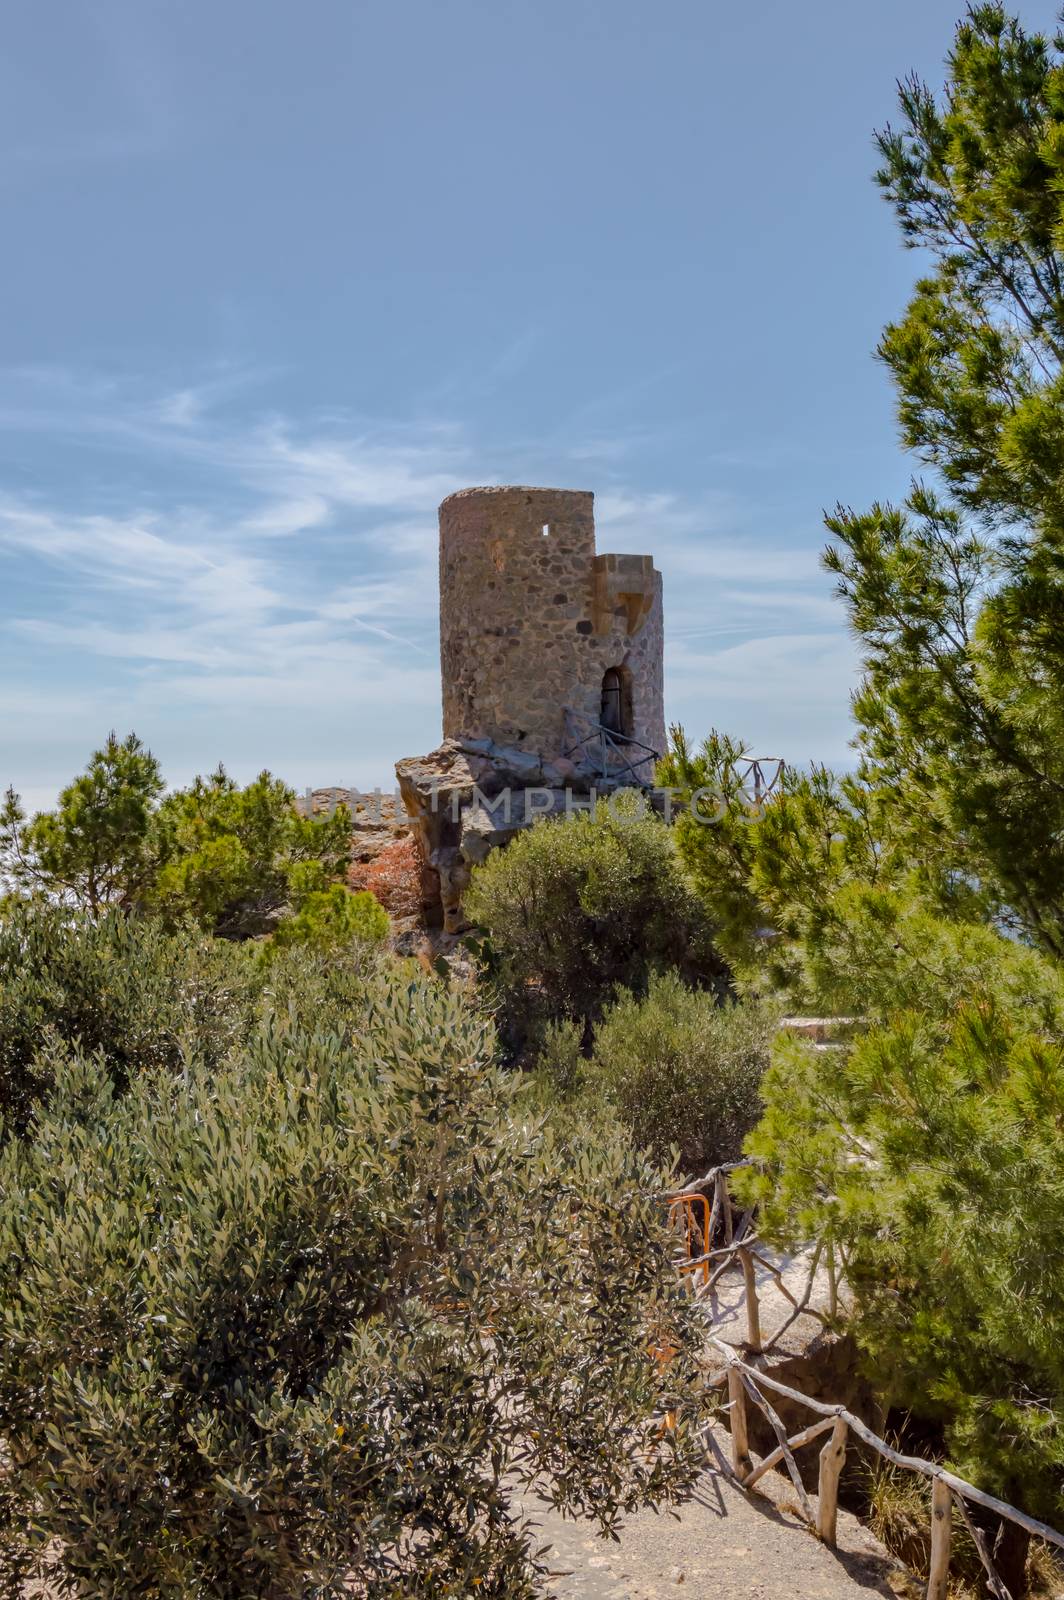 View of an old watchtower on the Mediterranean Sea in Palma de Mallorca, Spain